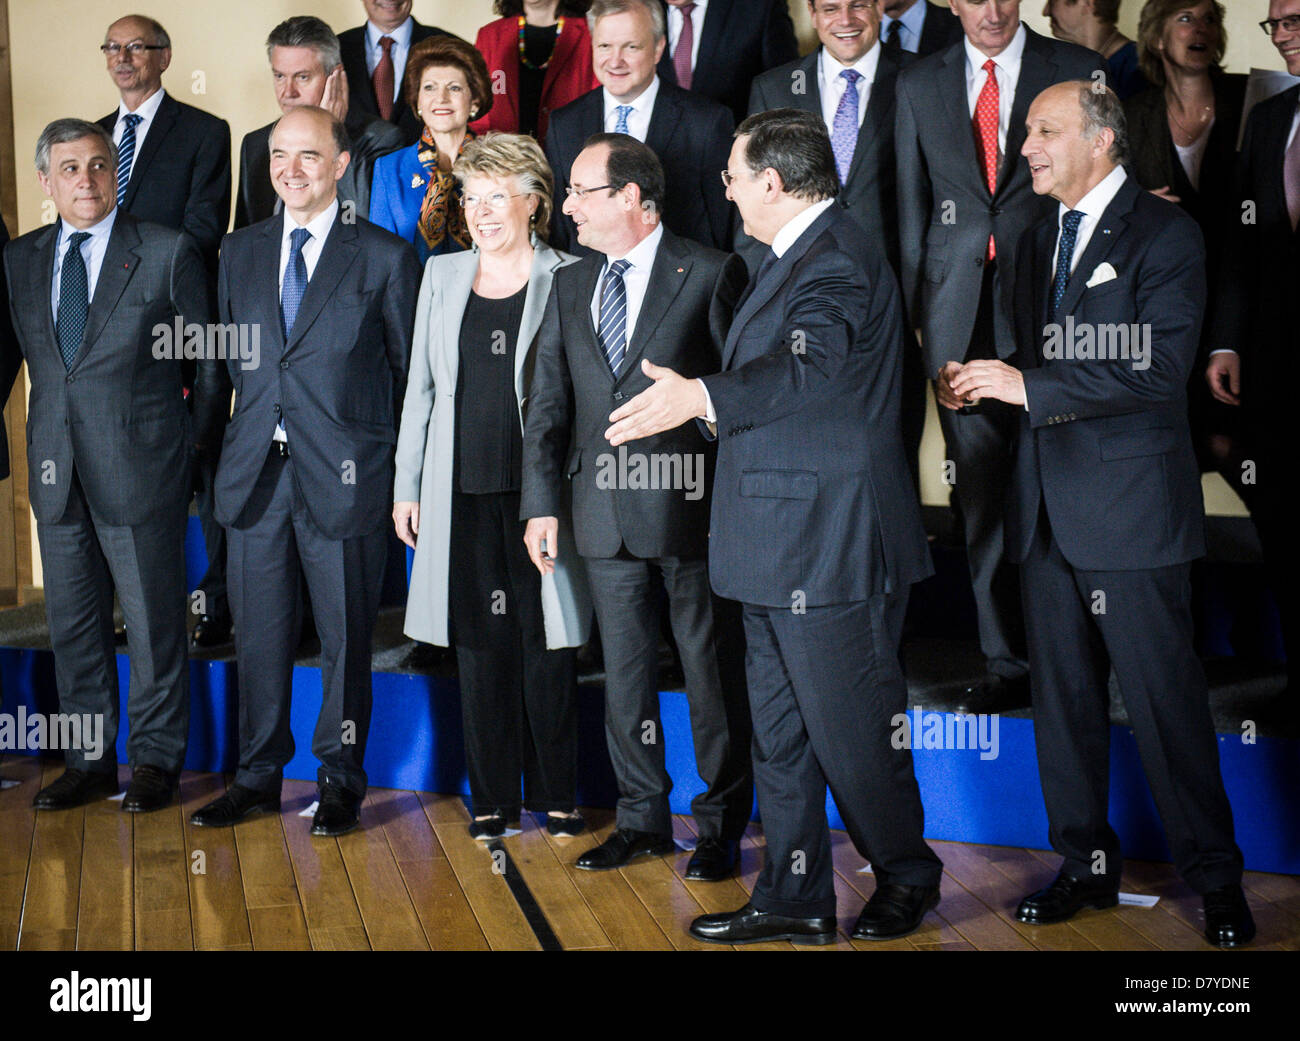 Brussels, Belgium. 15th May, 2013. French President Francois Hollande (C) and European Commission President Jose Manuel Barroso (R) talk during a family photo with members of the European Commision prior to a meeting, ahead of an international donor conference for the development of Mali, at EU headquarters    in Brussels, Belgium on 15.05.2013 by Wiktor Dabkowski (Credit Image: Credit:  Wiktor Dabkowski/ZUMAPRESS.com/Alamy Live News) Stock Photo